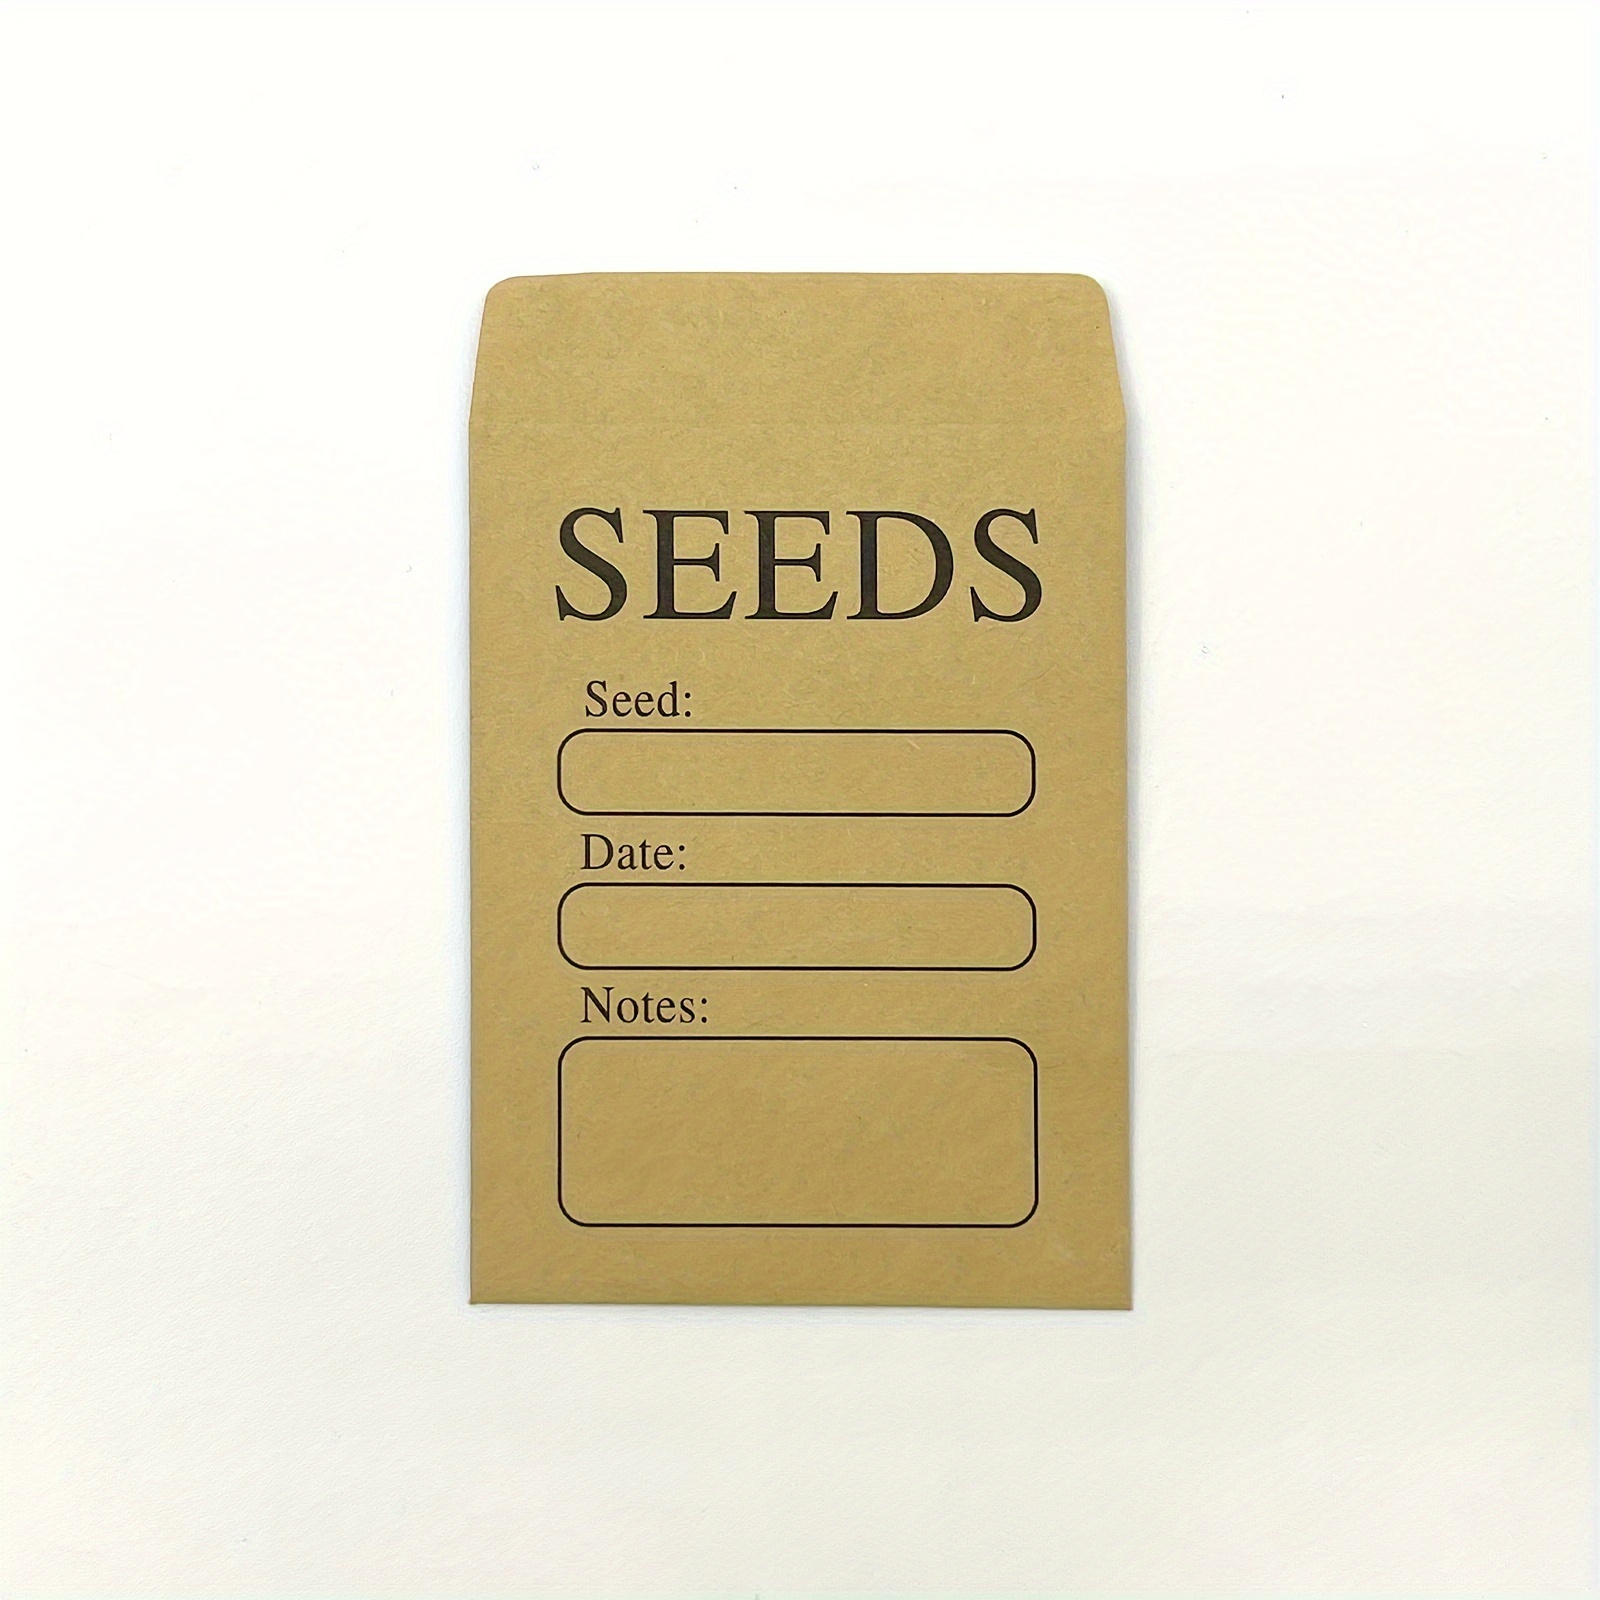 20pcs, Seed Envelopes, Resealable Seed Packets Envelope Self Adhesive  Sealing Seed Saving Envelopes Small Brown Paper Seed Storage Envelopes For  Colle